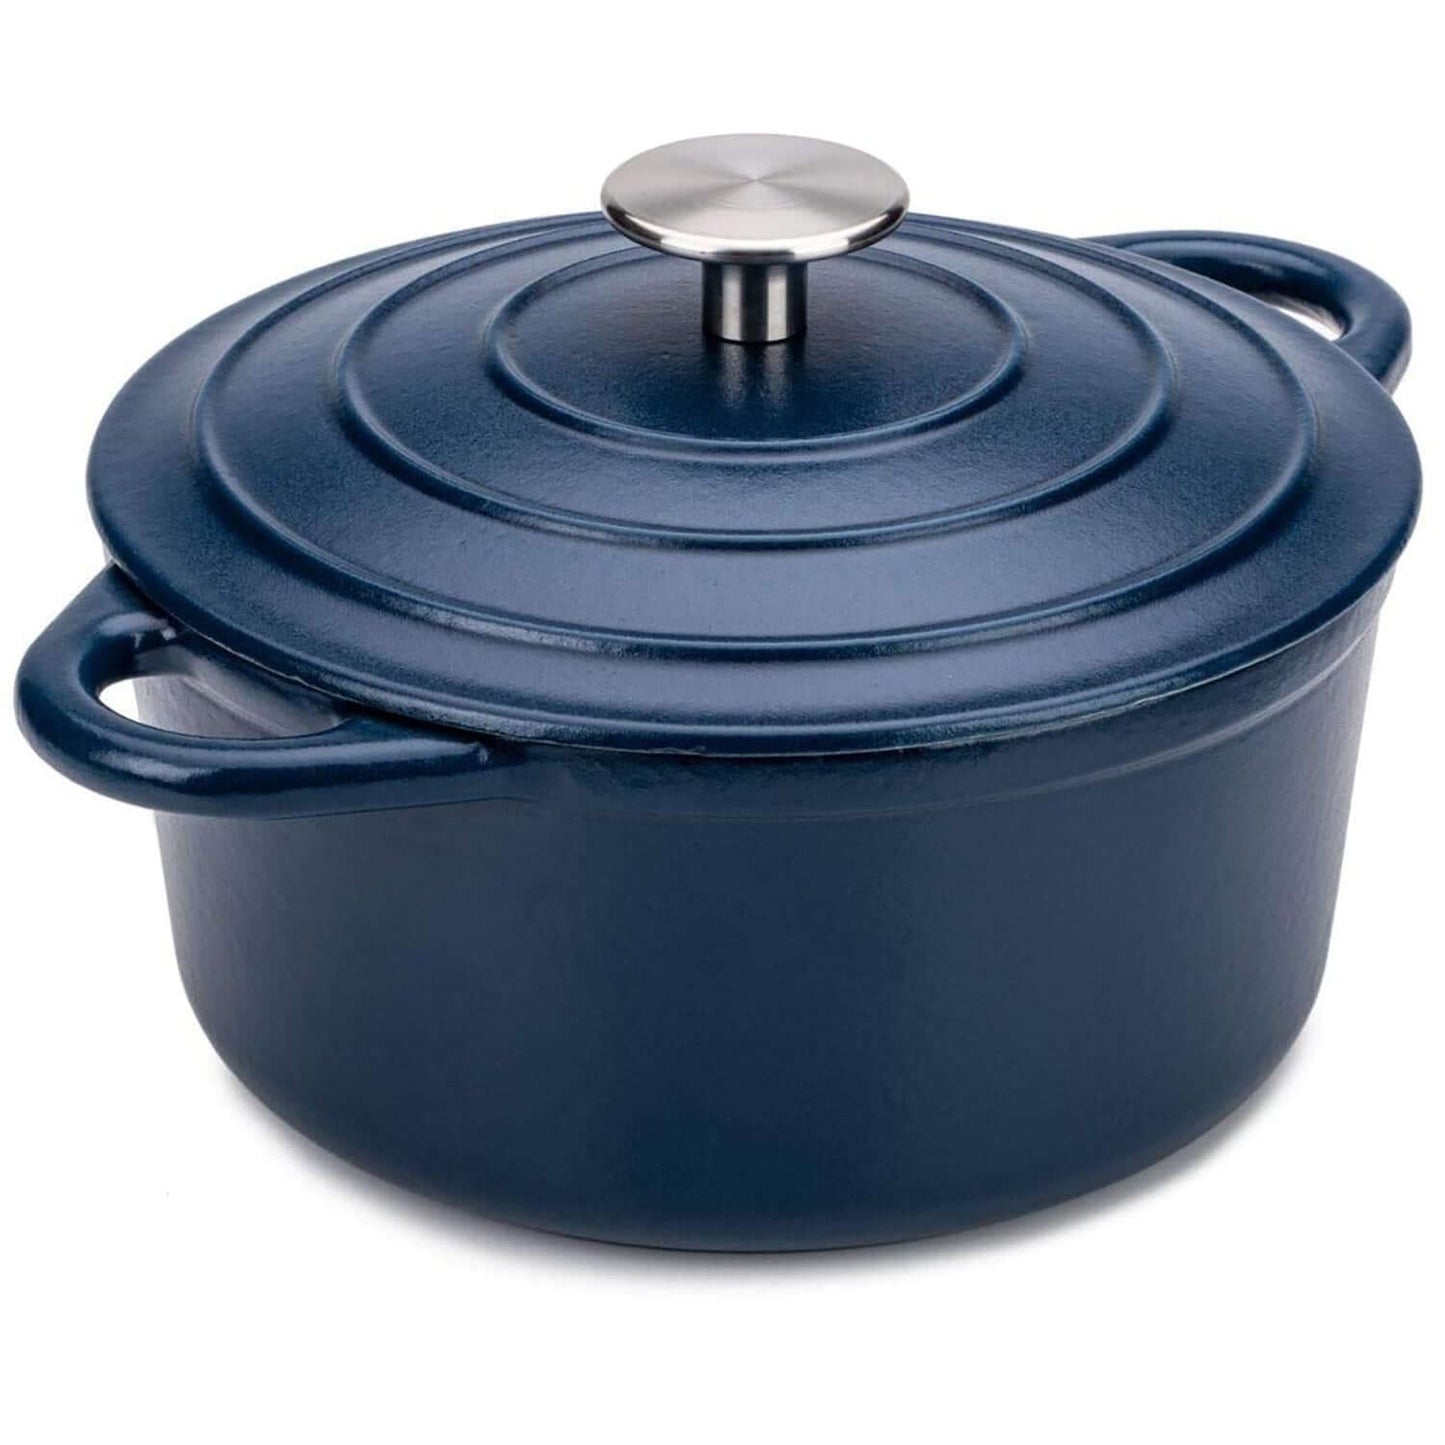 2.7L , 3.9L or 5.2L Round Cast Iron Casserole Oven Roasting Dish - 6 Colours - Induction & Gas Safe Dutch - with Lid